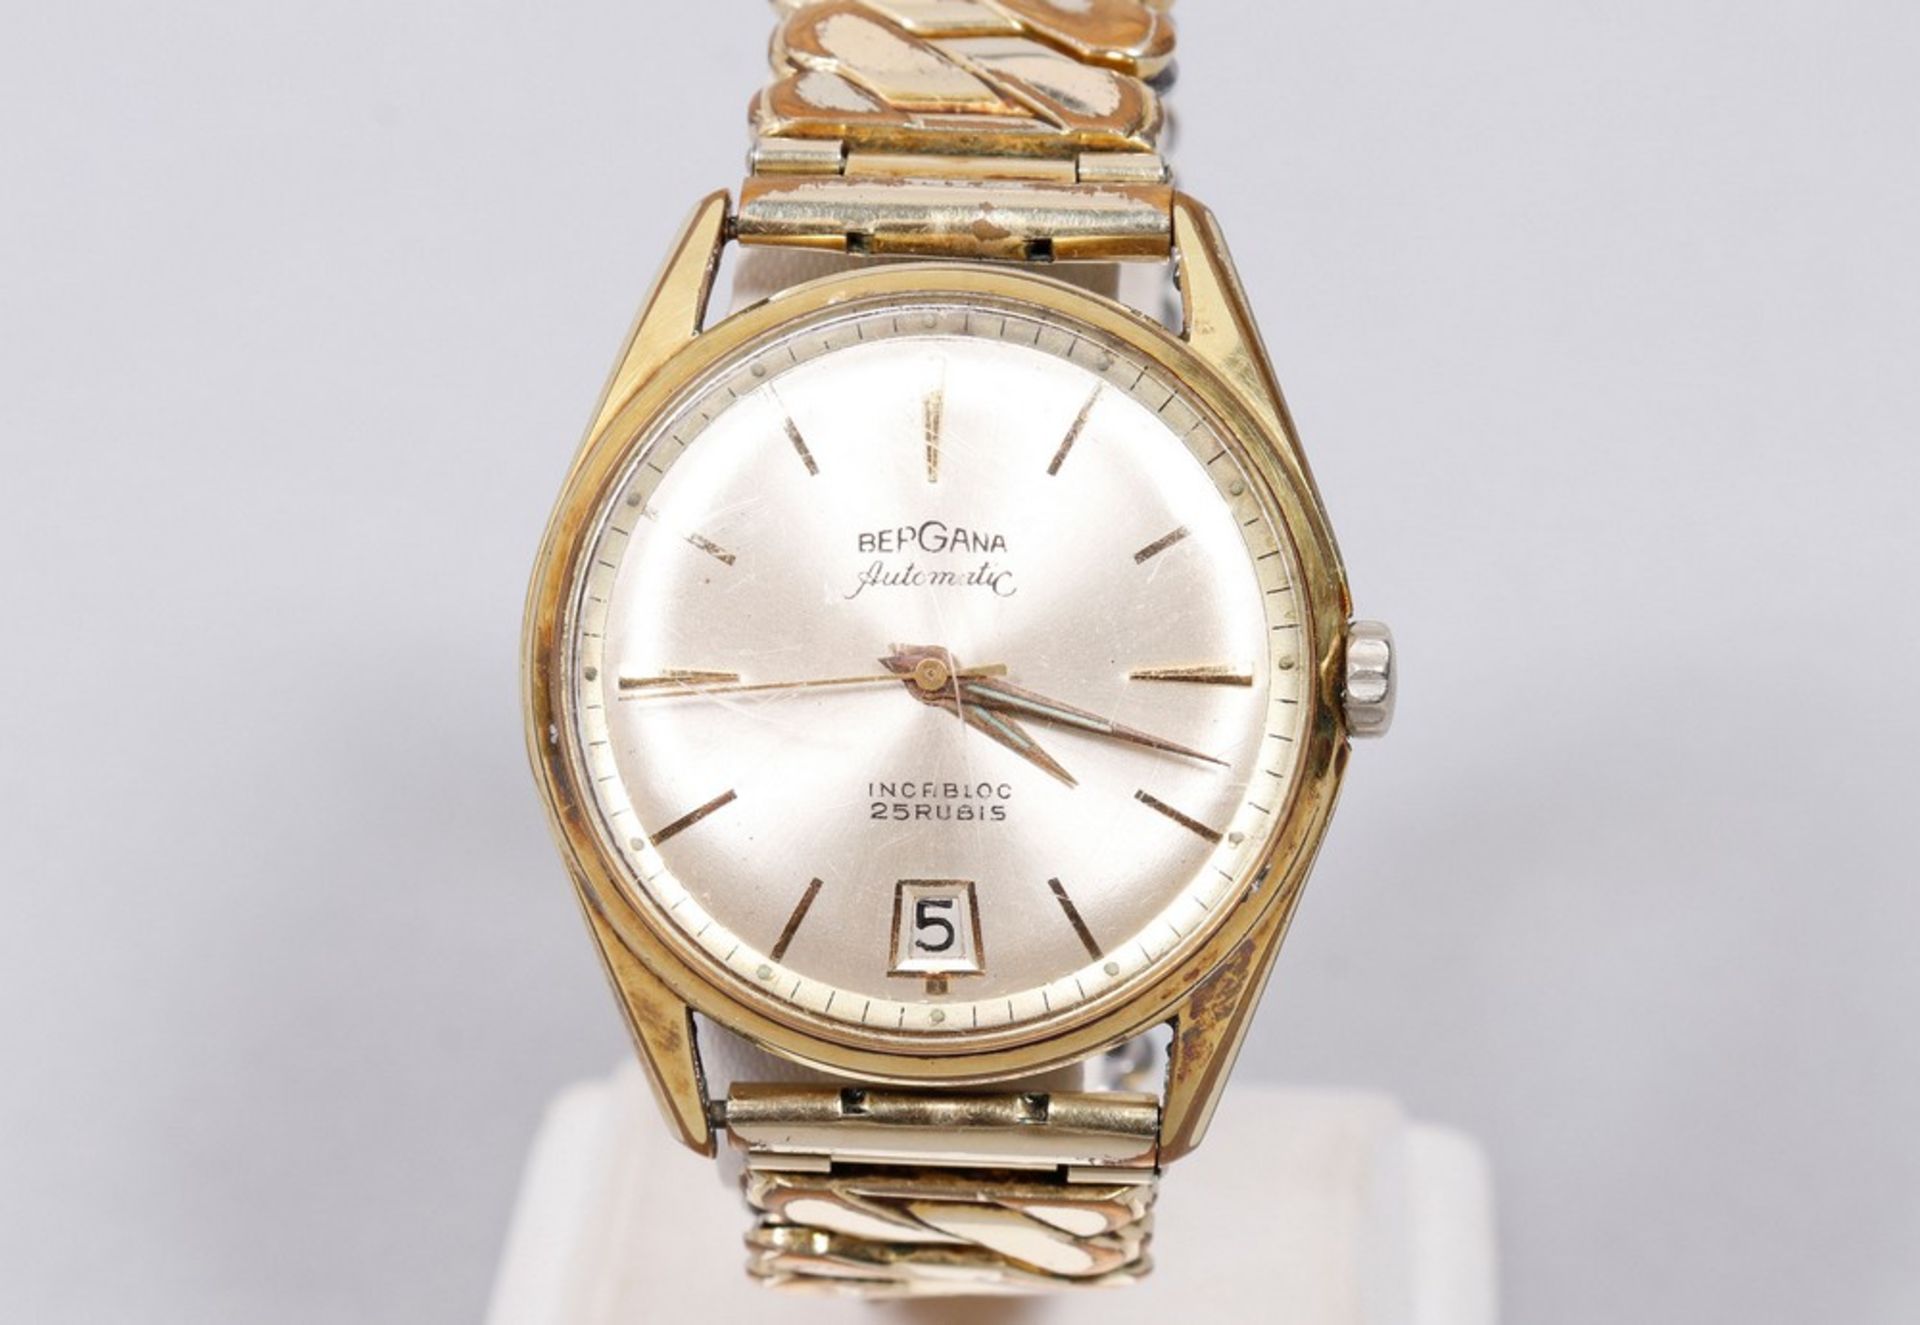 Men's wristwatch, Bergana automatic, gold plated, so-called ultra safe quality, 1950s - Image 2 of 4